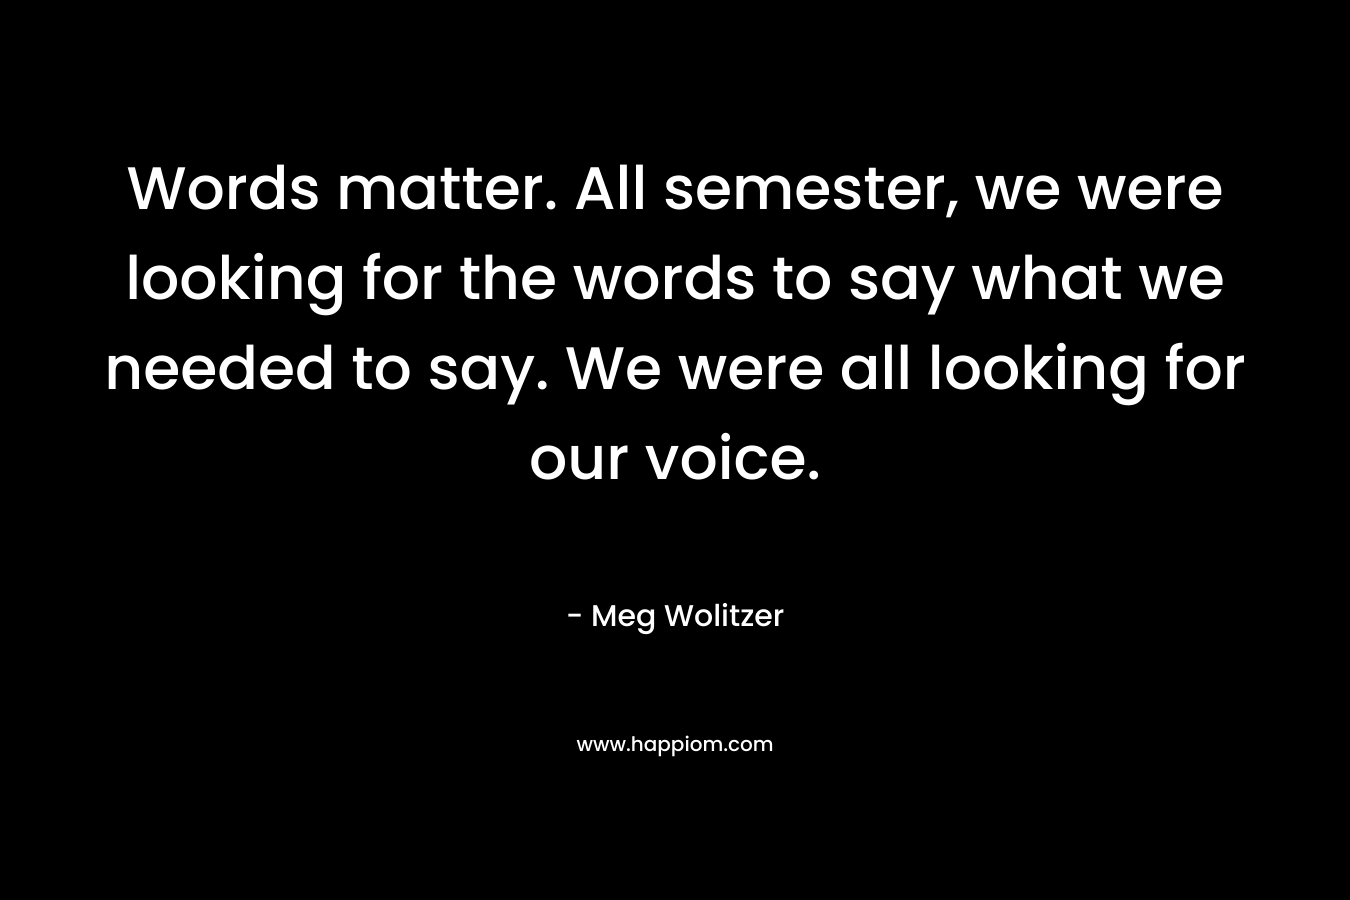 Words matter. All semester, we were looking for the words to say what we needed to say. We were all looking for our voice. – Meg Wolitzer